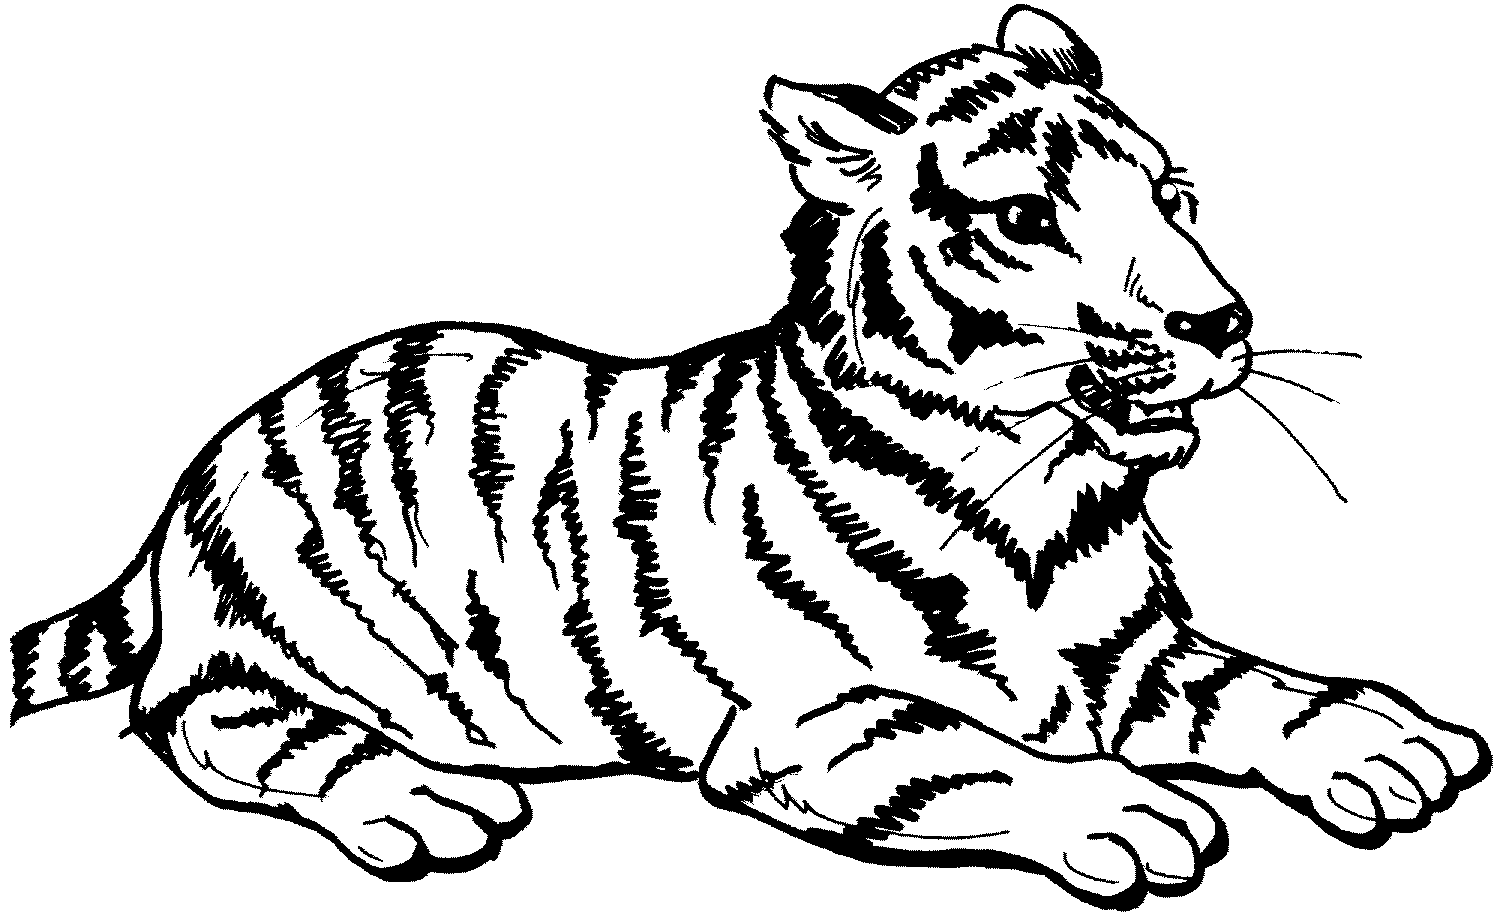  Big Cat Coloring Pages for Adult